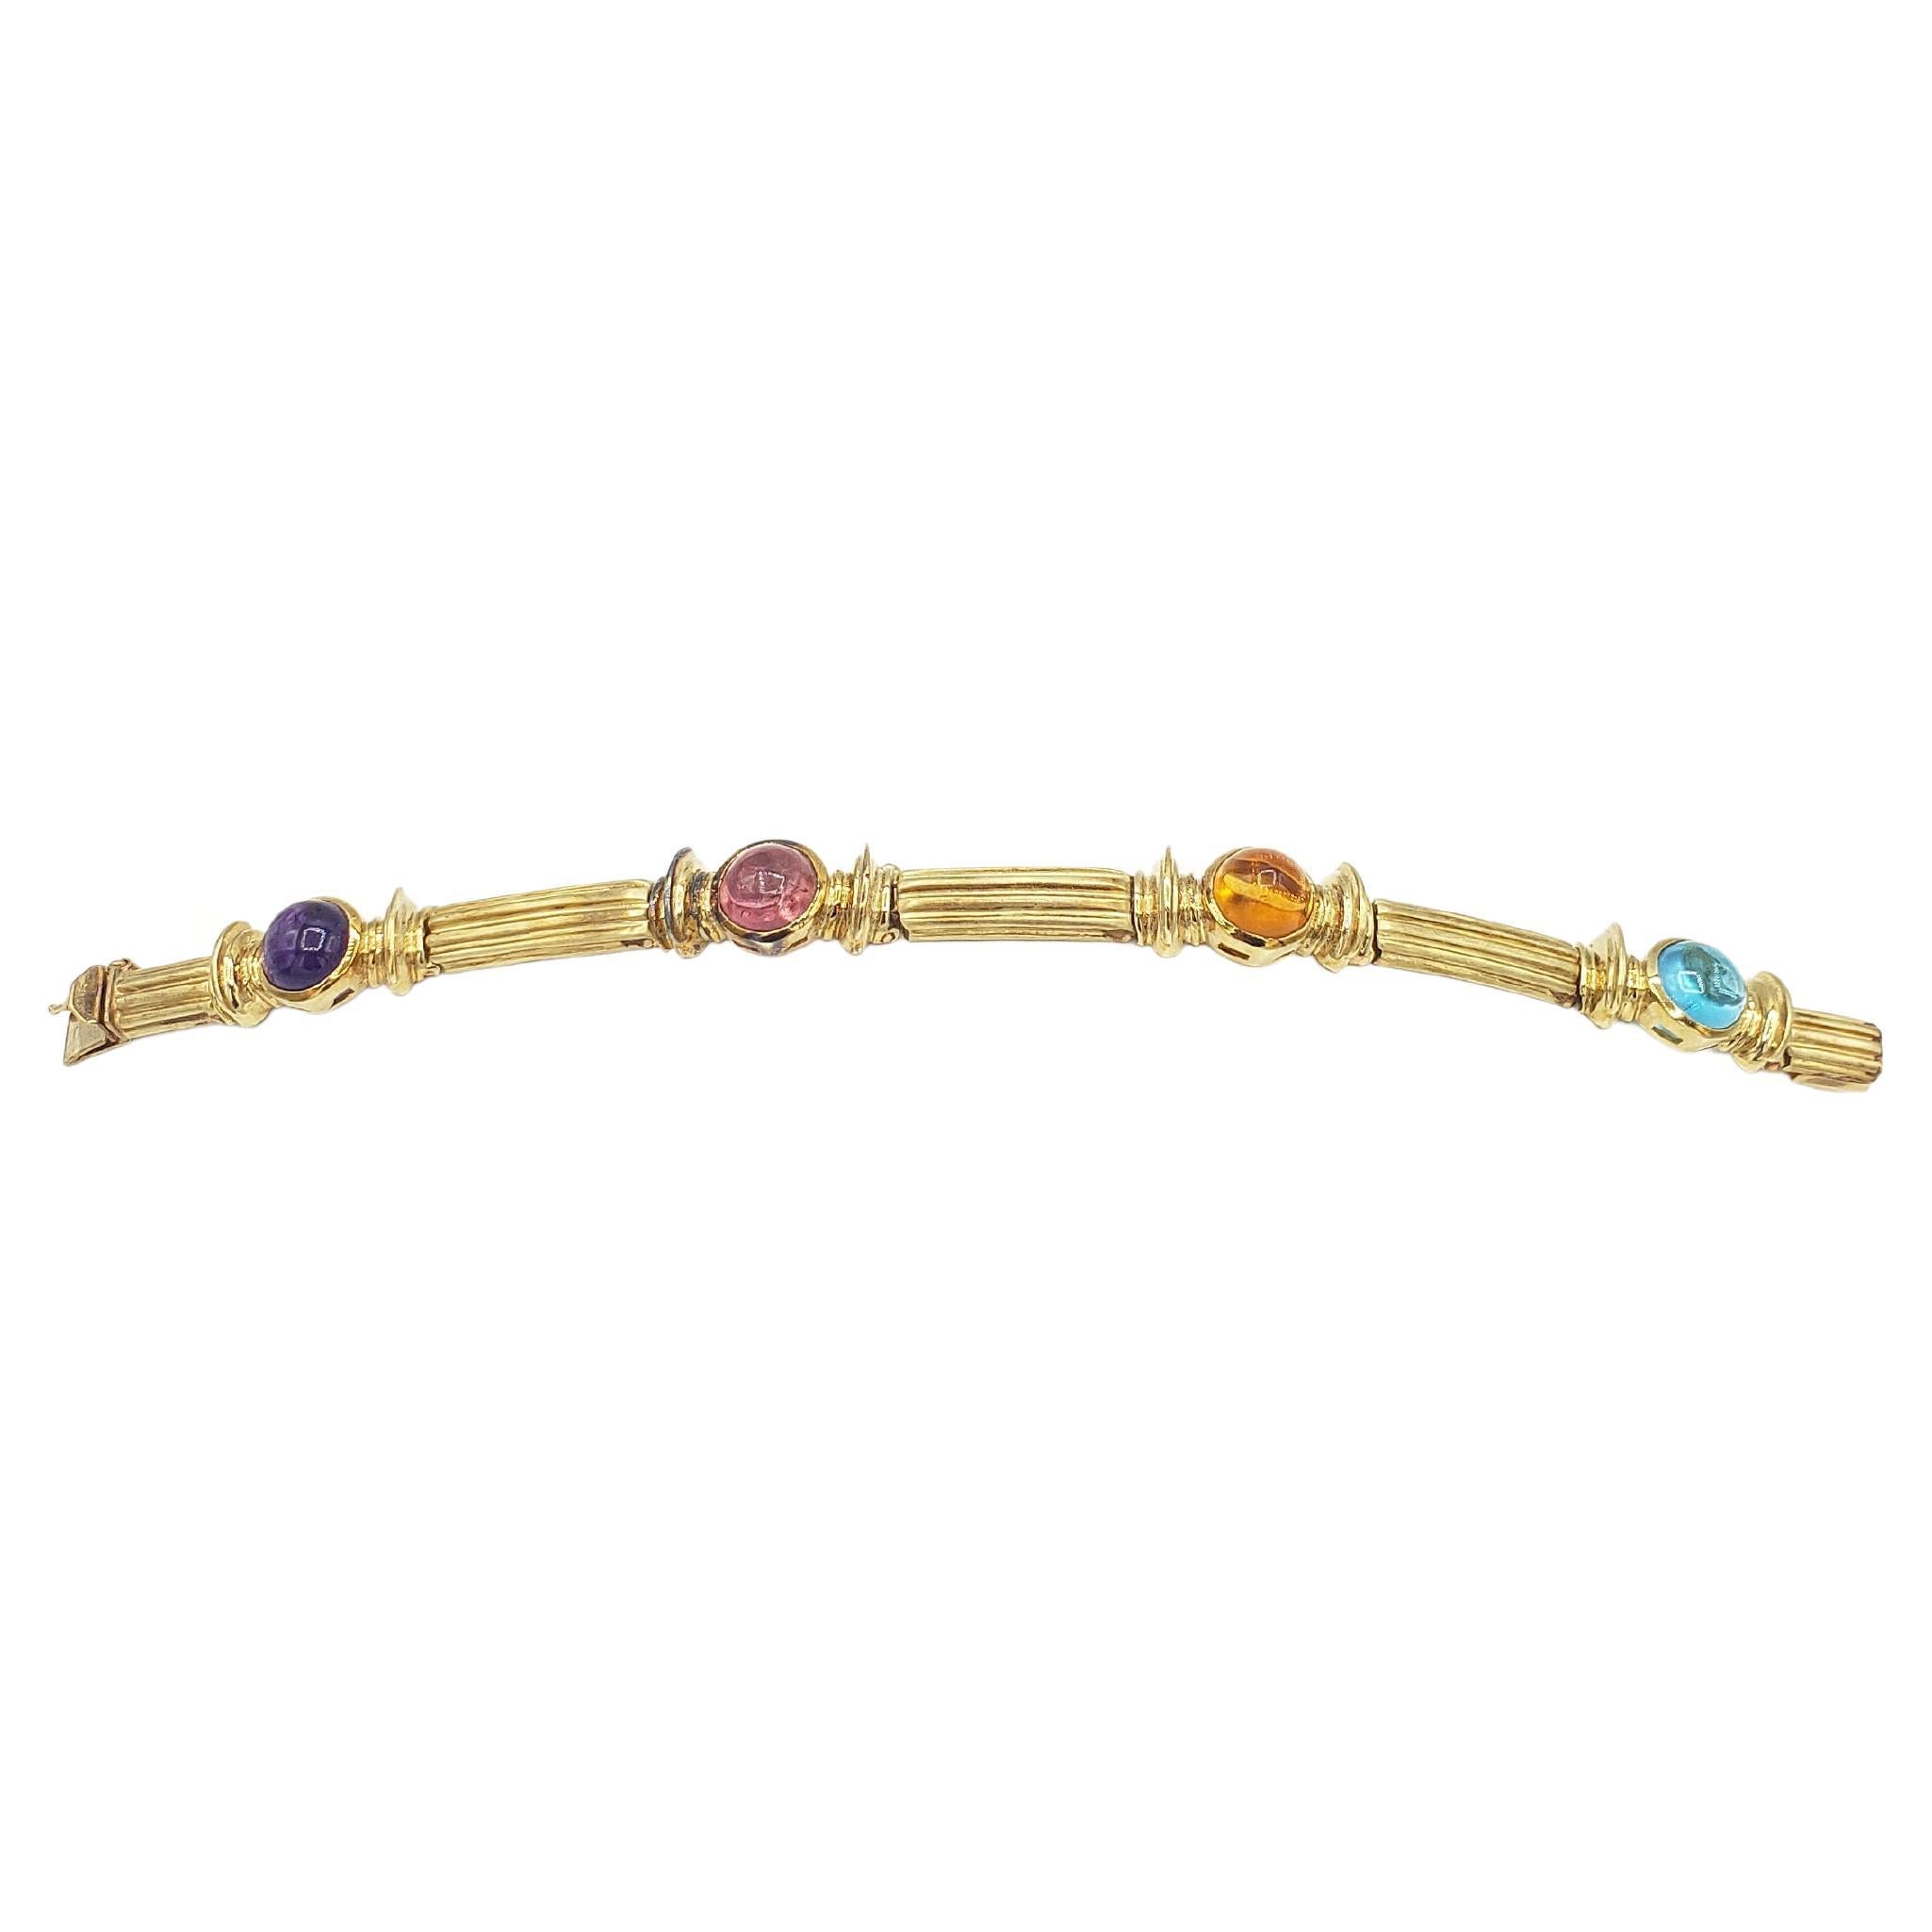 NEW Blue and Pink Tourmaline, Amethyst, Citrine Bracelet in 14k Yellow Gold